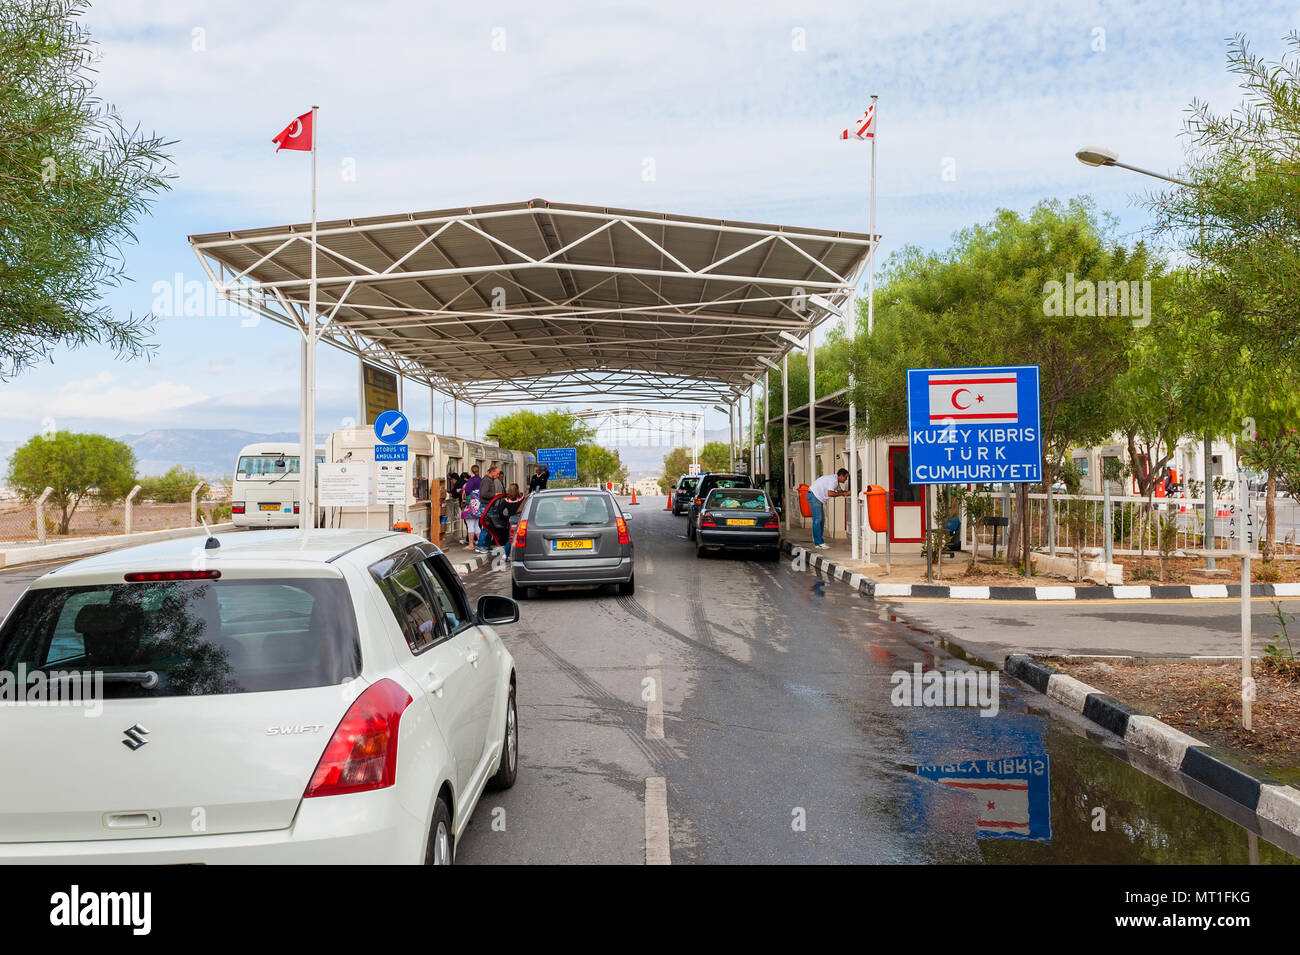 Border Crossing between Cyprus and the Turkish Republic of Northern Cyprus. Northern Cyprus is recognized by Turkey only. Stock Photo